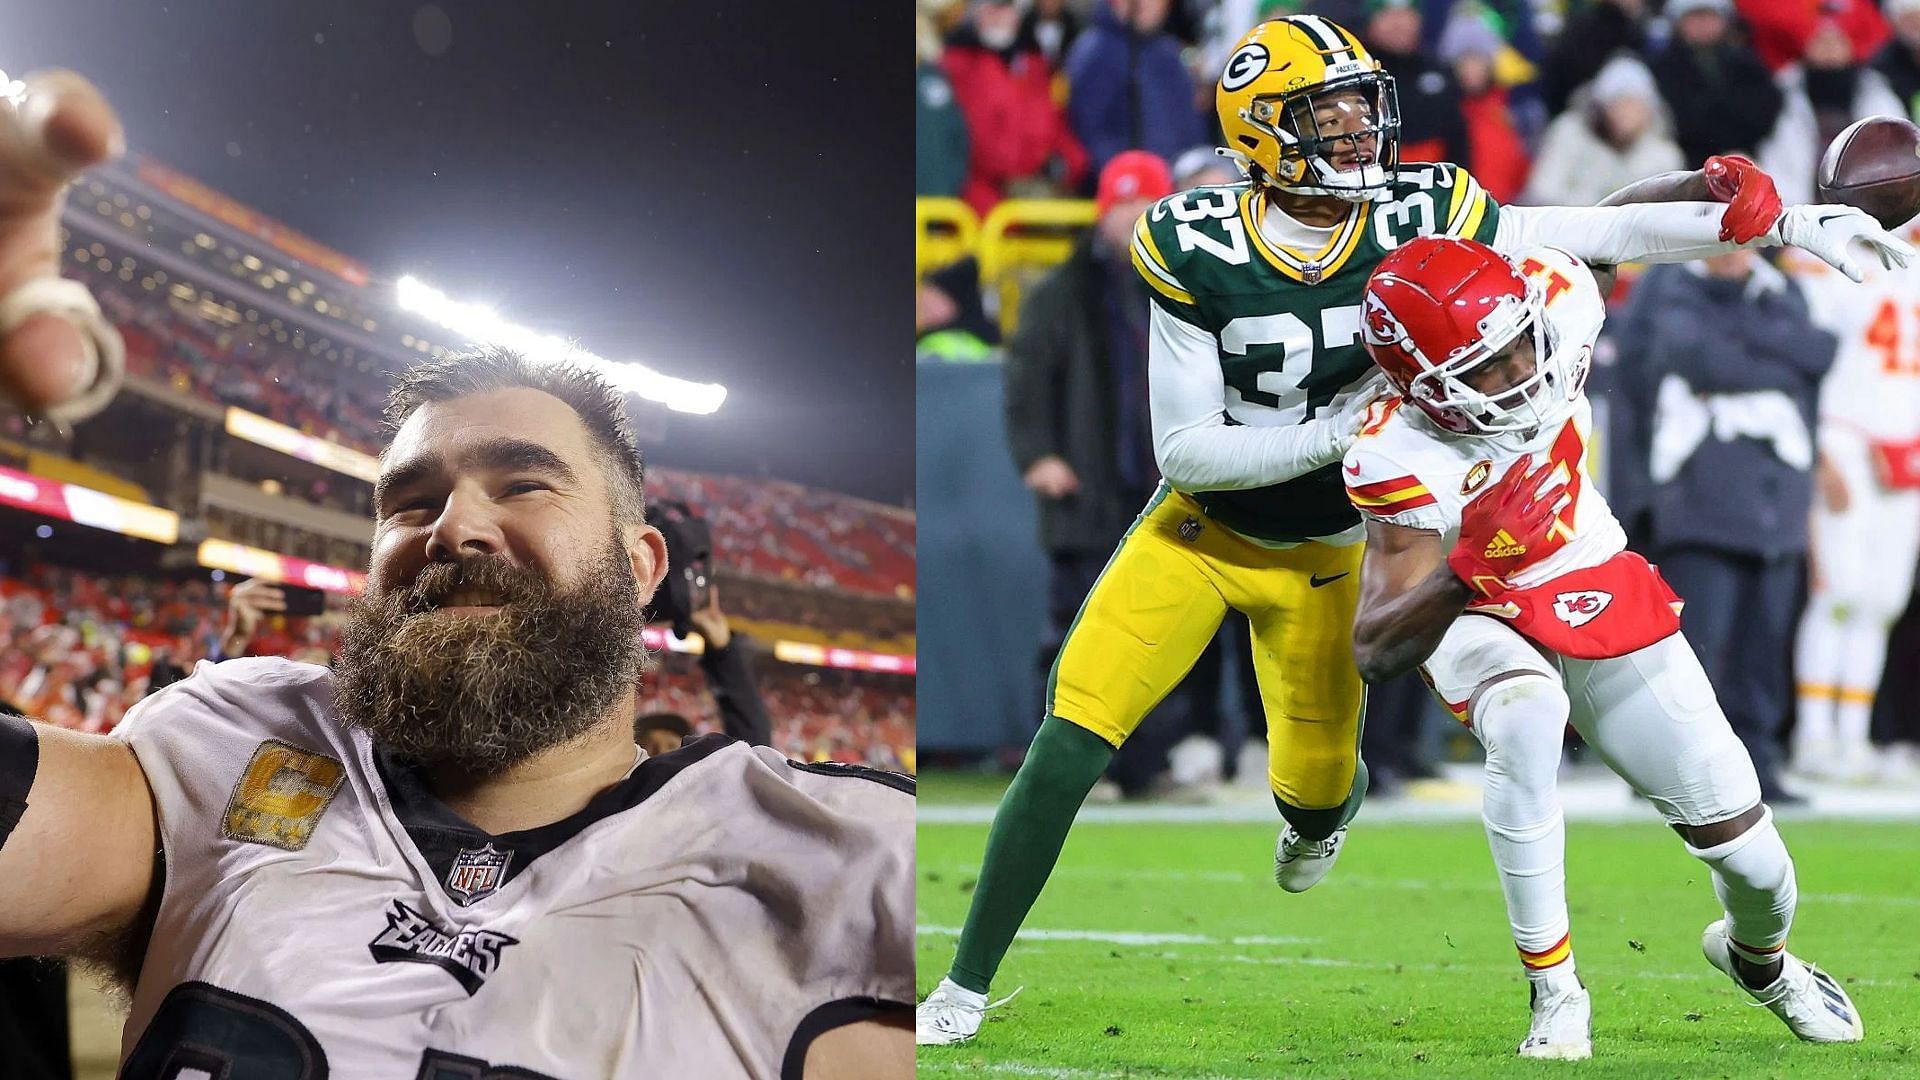 Kelce offers his thoughts on the no call in the Packers and Chiefs game.